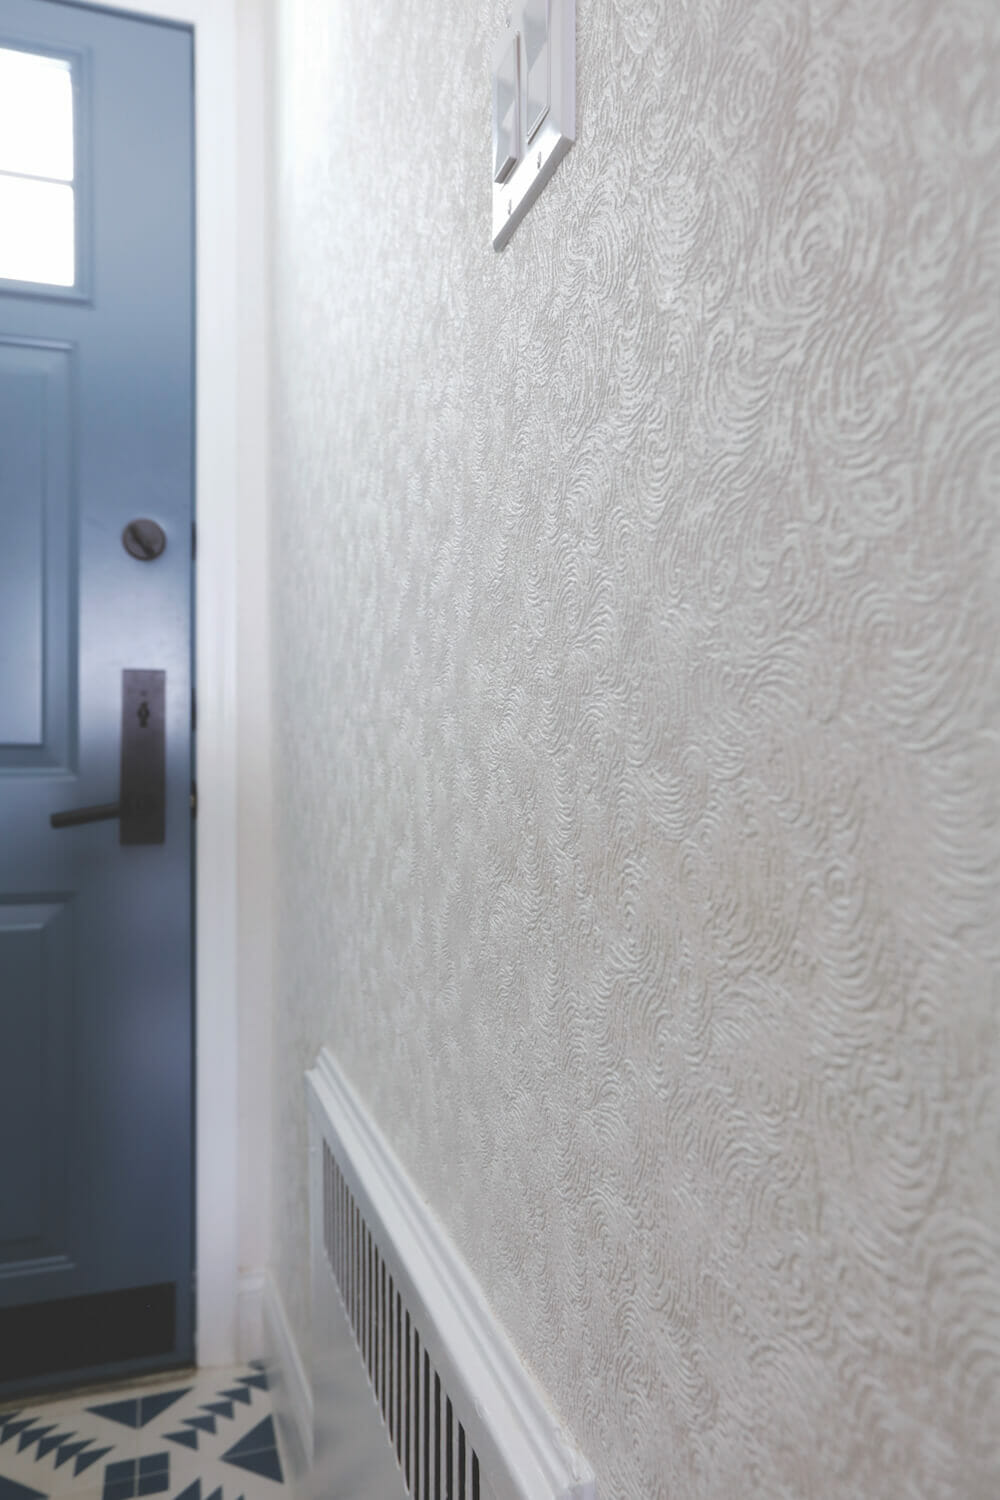 Image of closeup textured white wallpaper in entryway